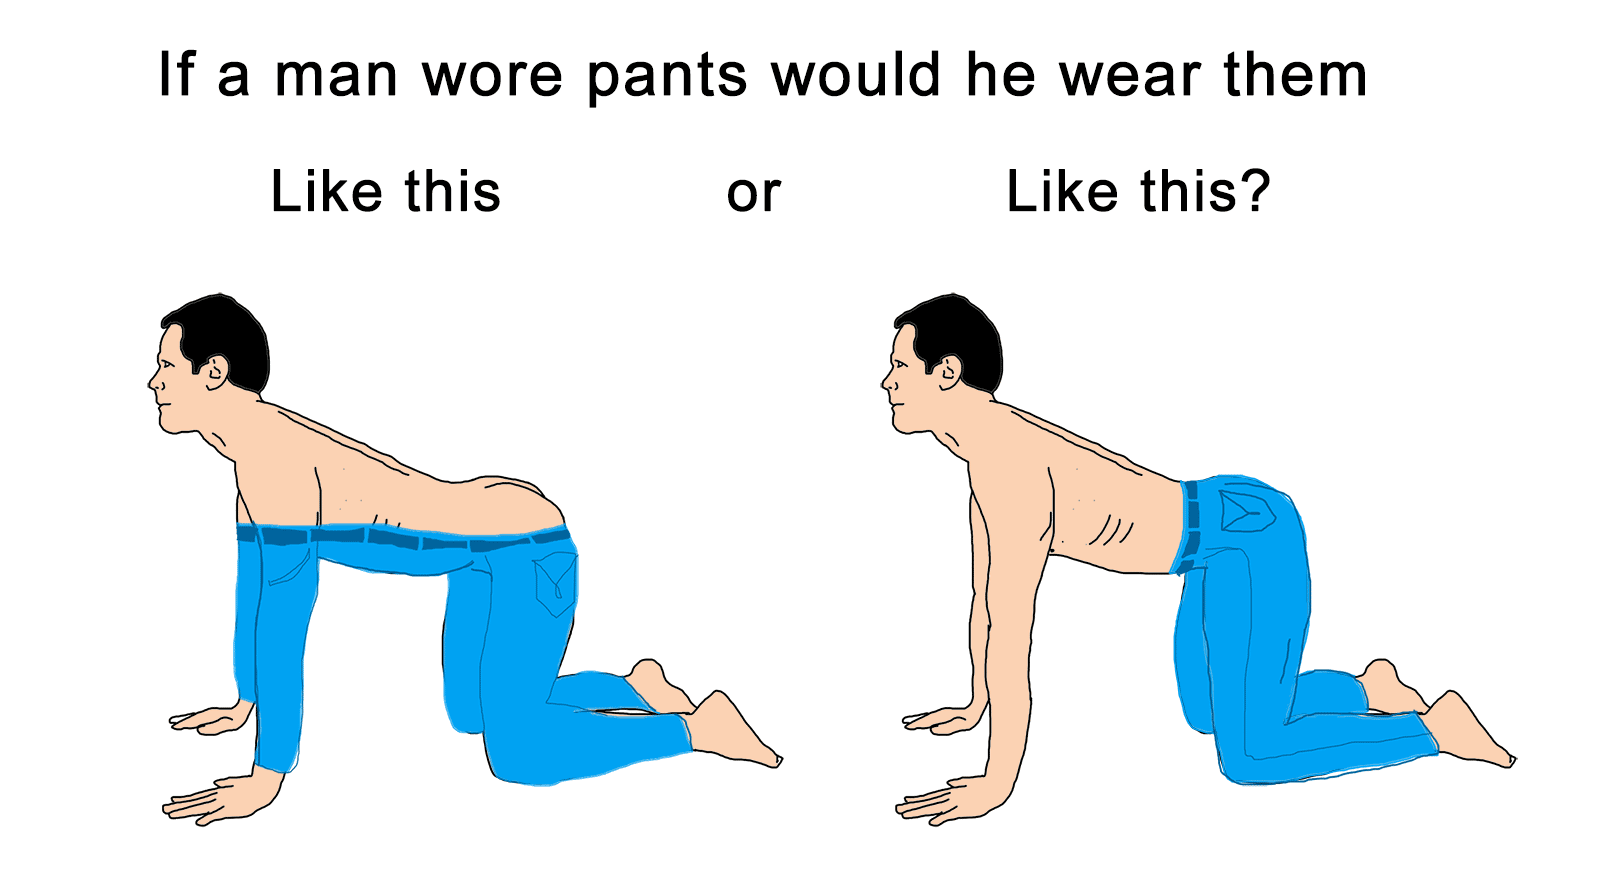 If a man wore pants...